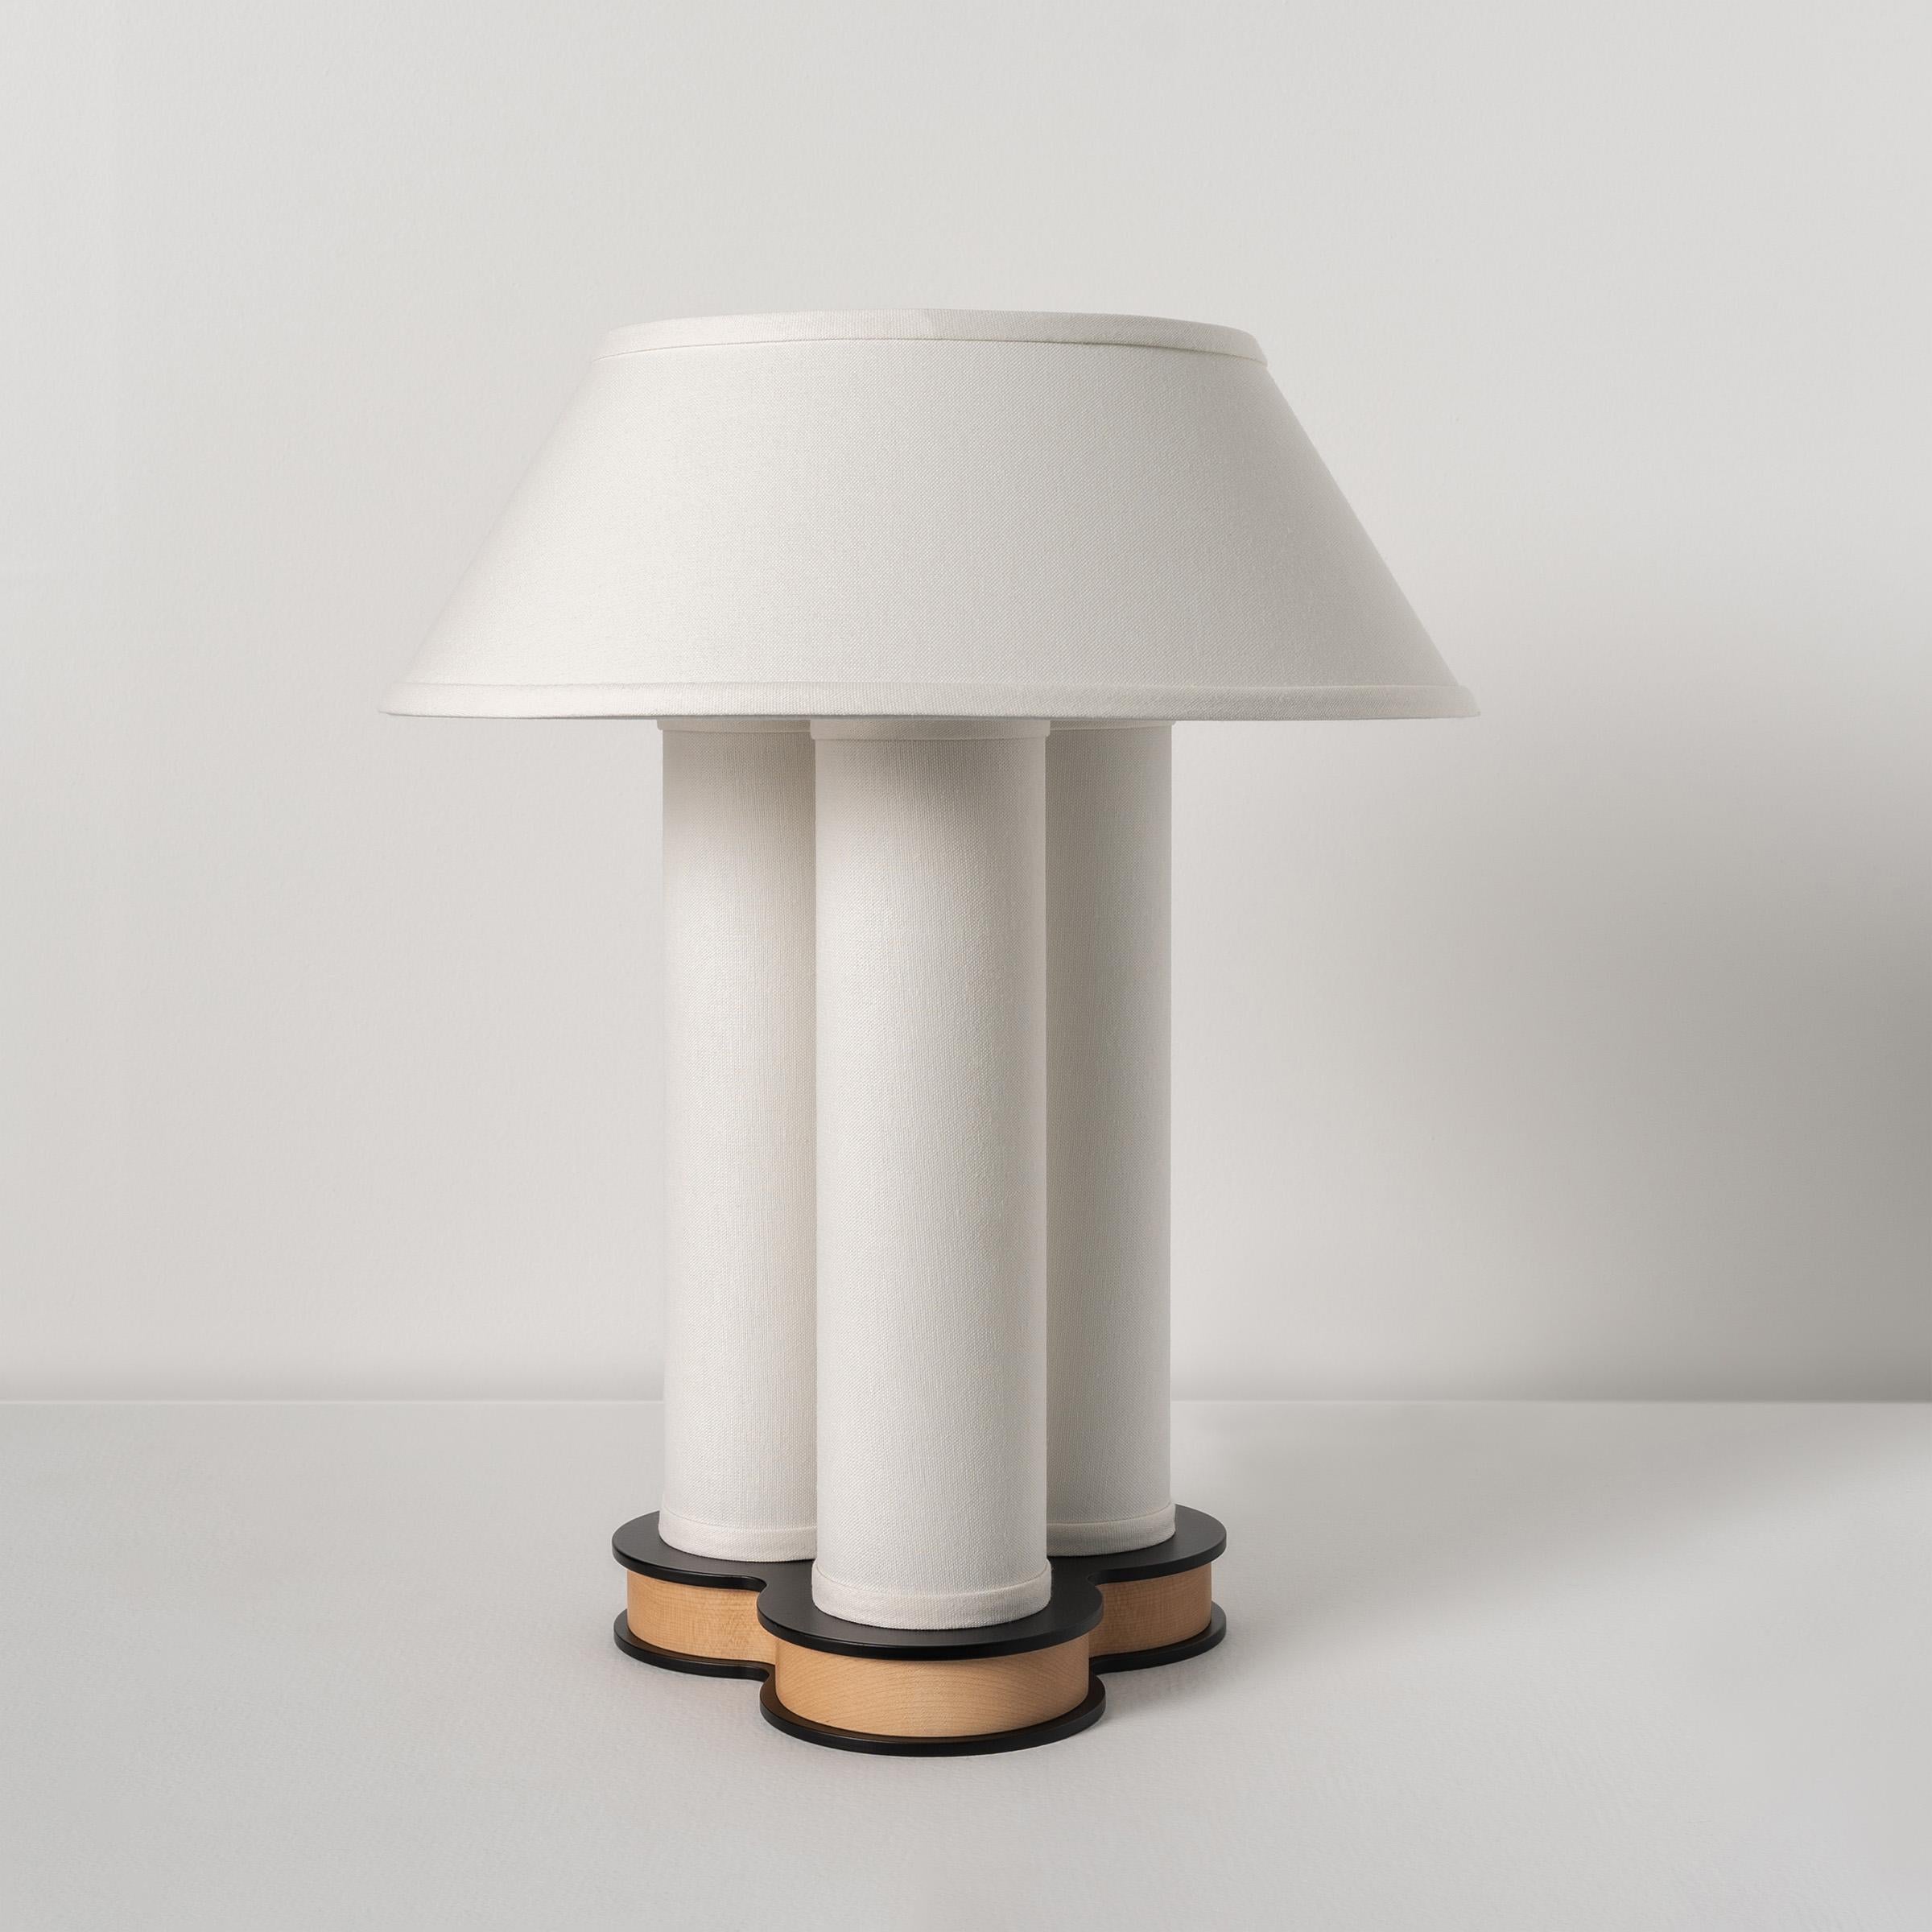 Hand-Crafted Pillaret Trio 18in Table Lamp by Studio Dunn For Sale